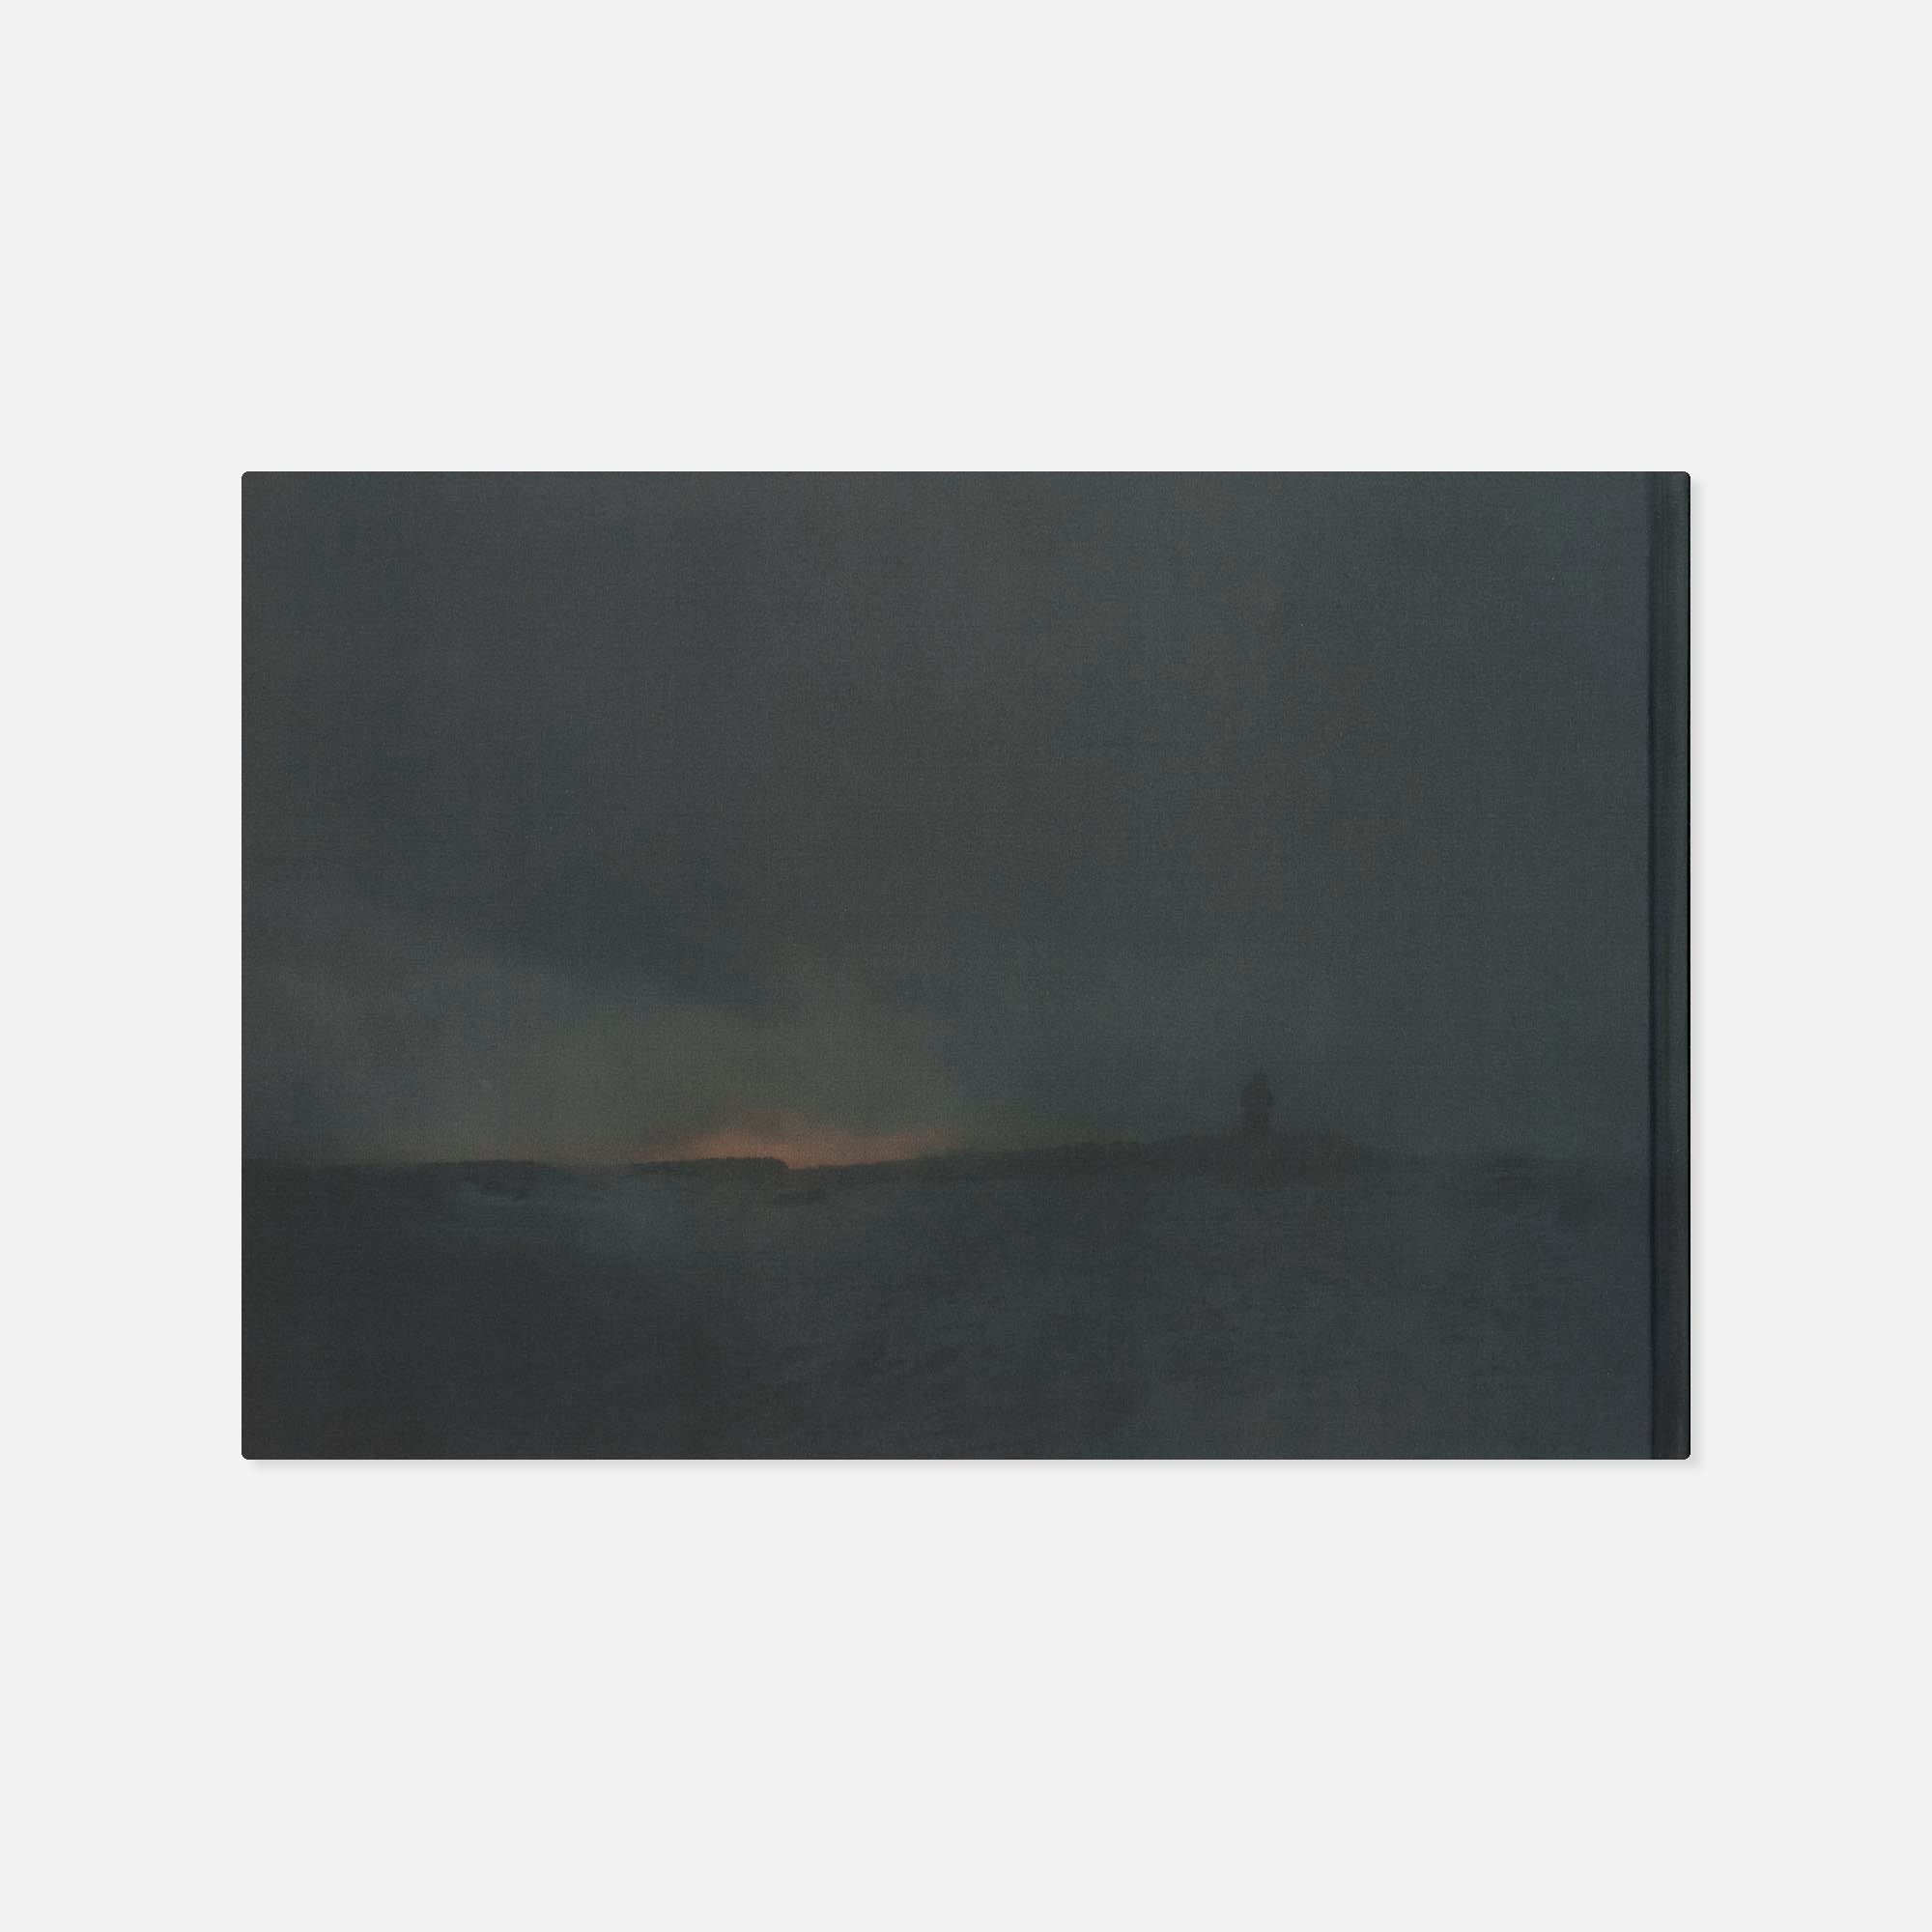 Todd Hido — The End Sends Advance Warning